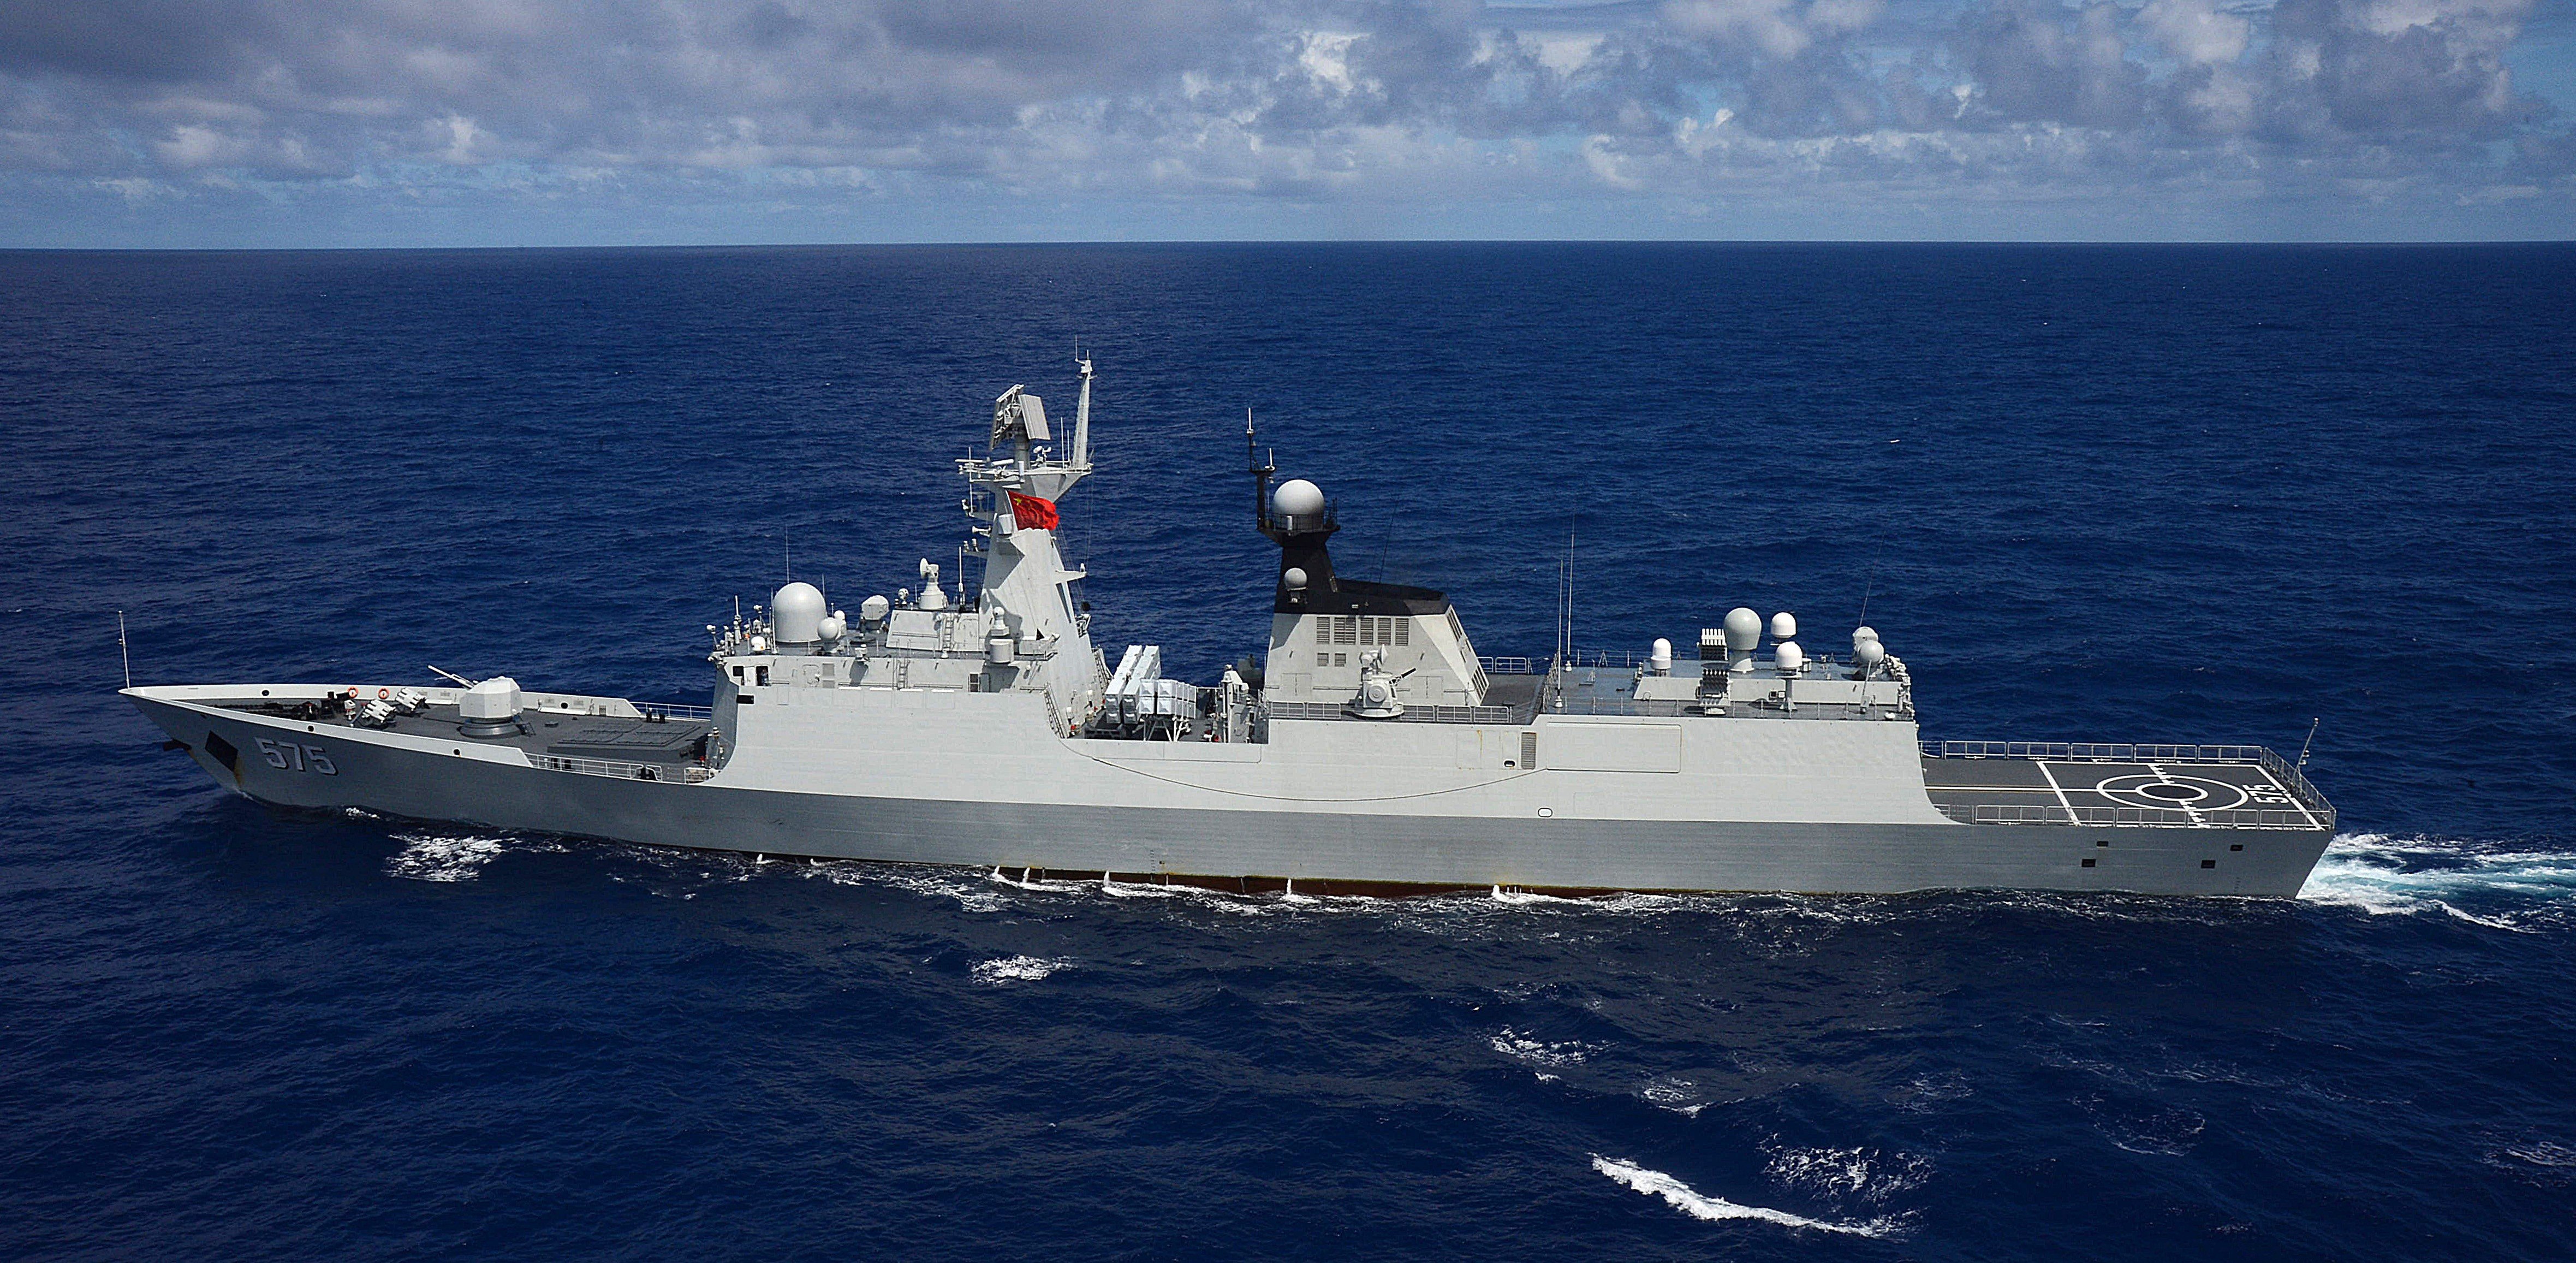 A Chinese frigate pictured taking part in the Rim of the Pacific naval exercises in 2014. Photo: Handout